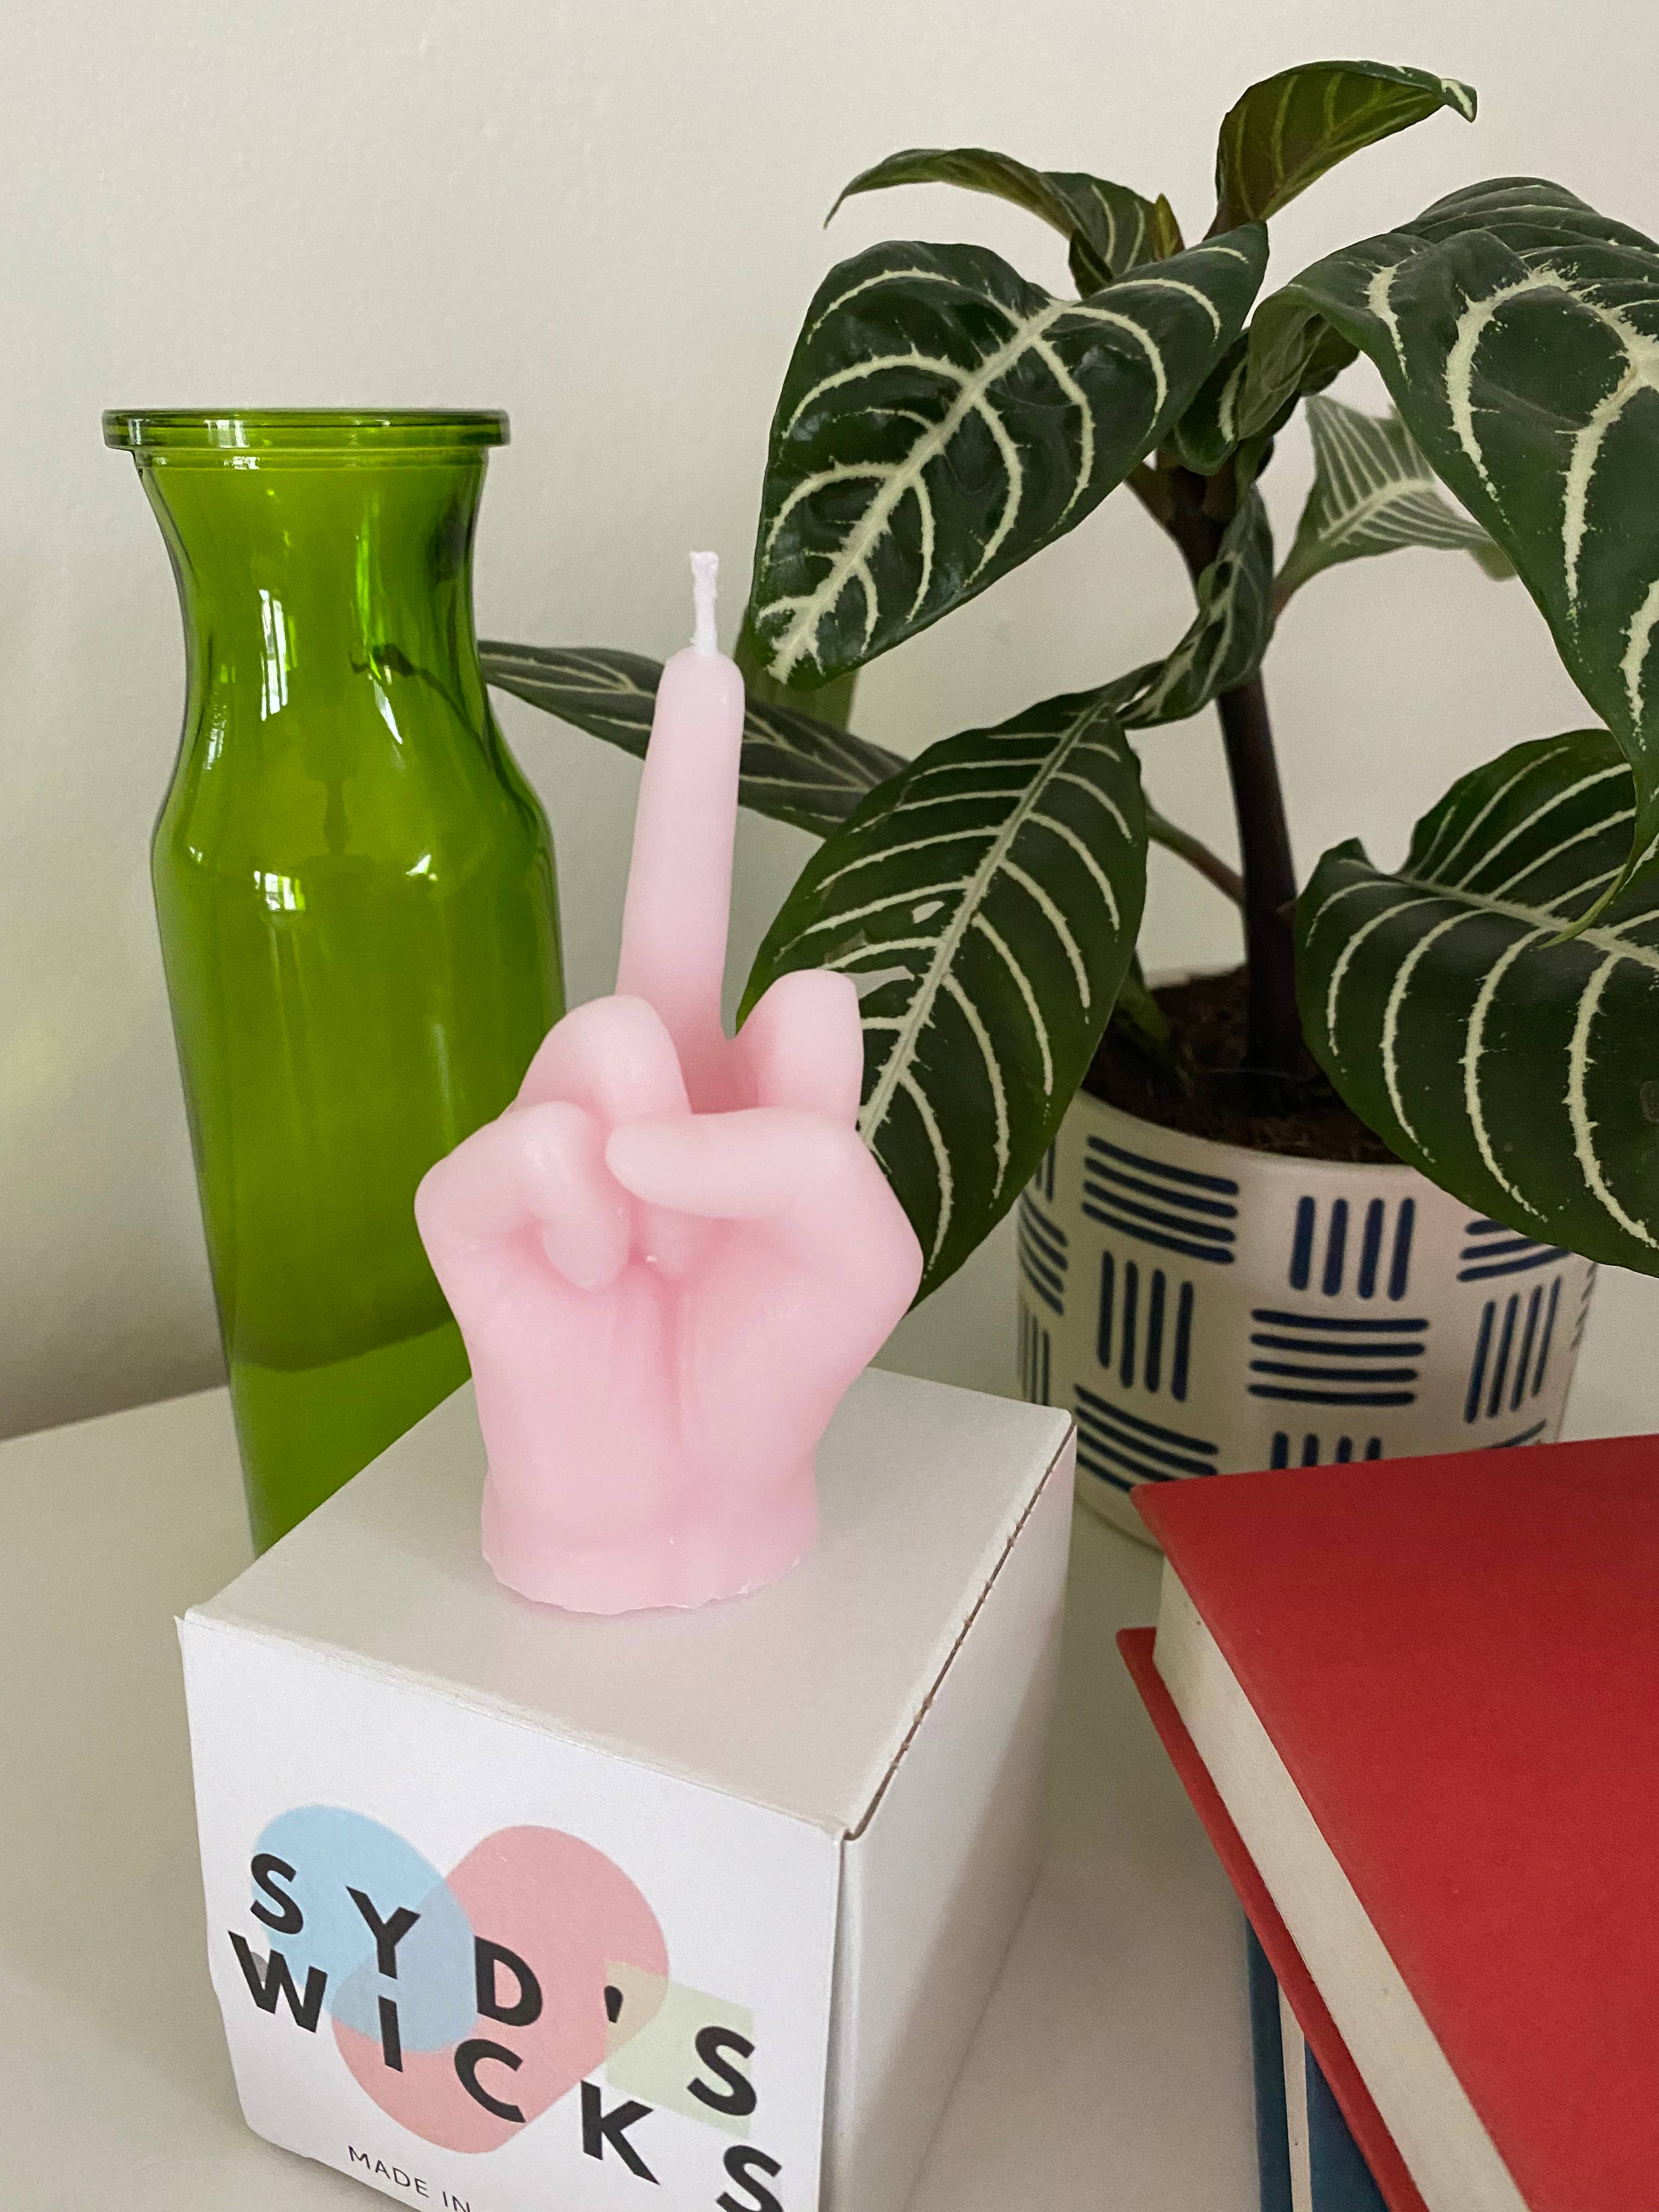 Life Size Middle Finger Candle